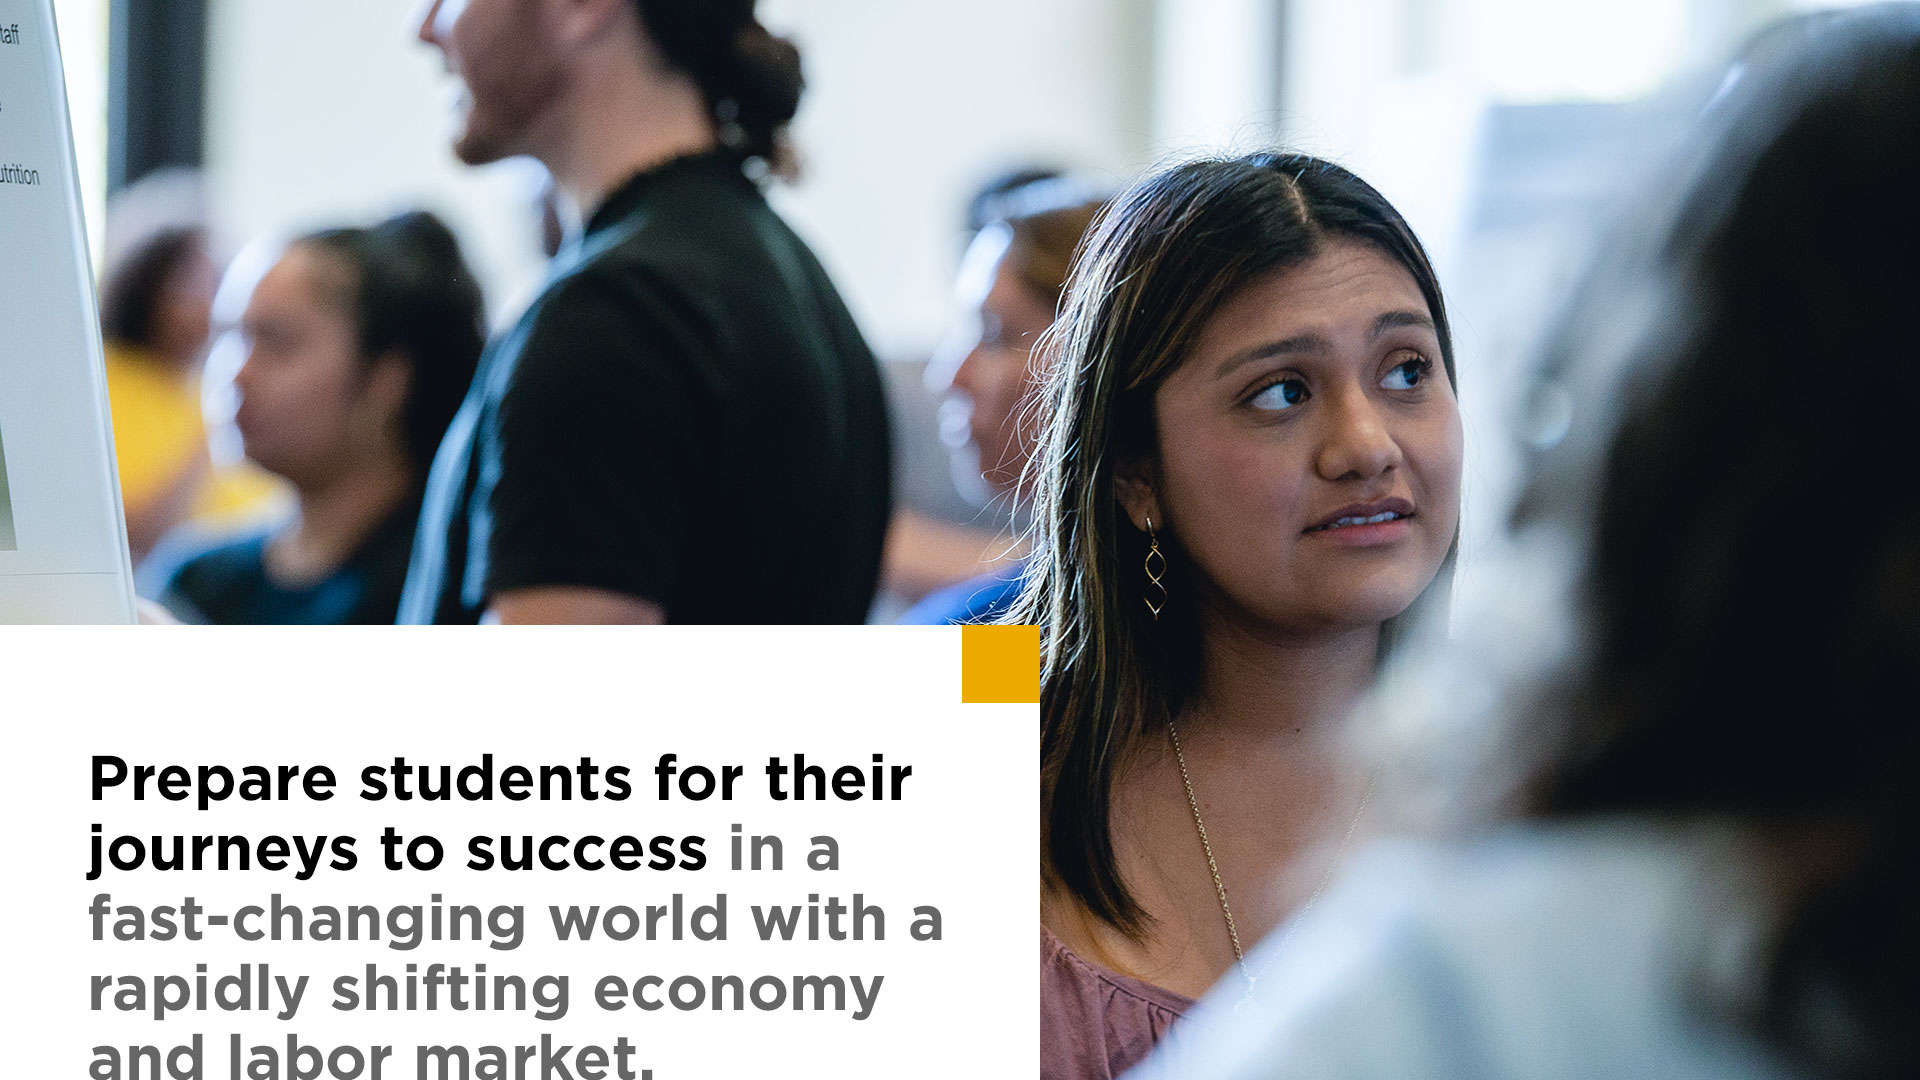 Prepare students for their journeys to success in a fast-changing world with a rapidly shifting economy and labor market. Image shows student looking off camera. 